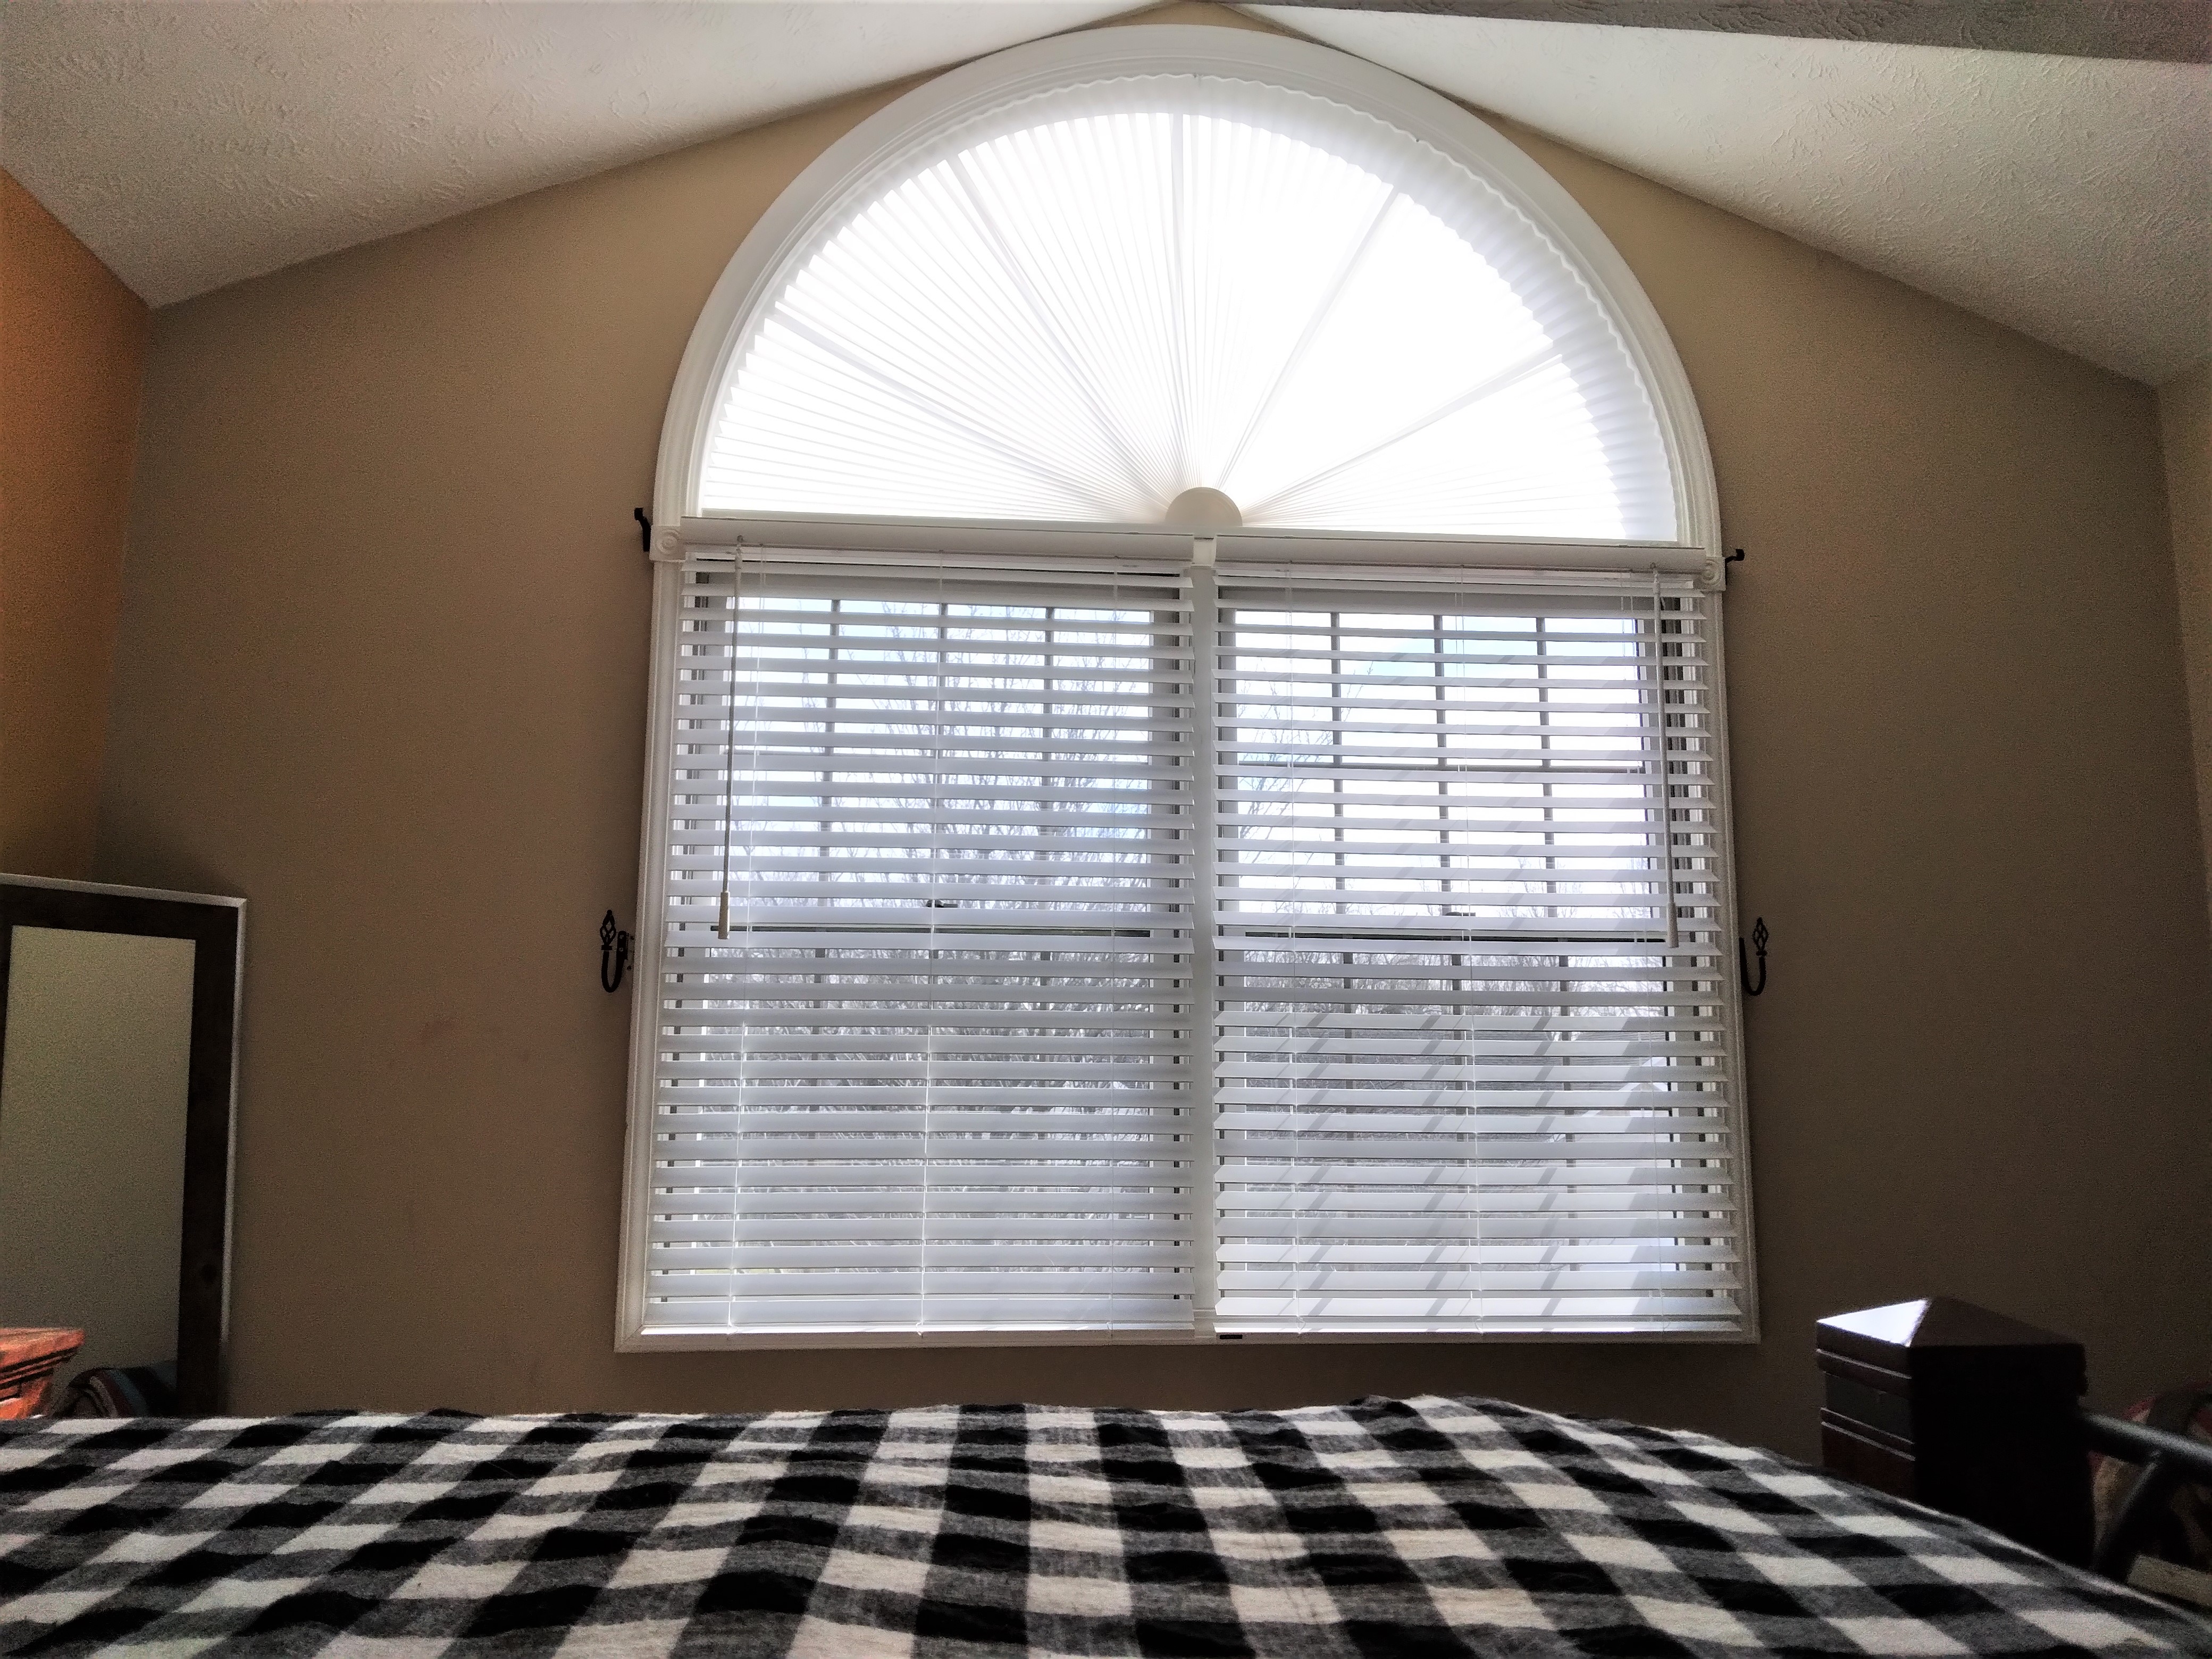 This pleated shade arch together with these faux wood blinds make the perfect window coverings combo for this bedroom window.  BudgetBlinds  WindowCoverings  Blinds  Shades  SpringfieldIllinois  Springfield